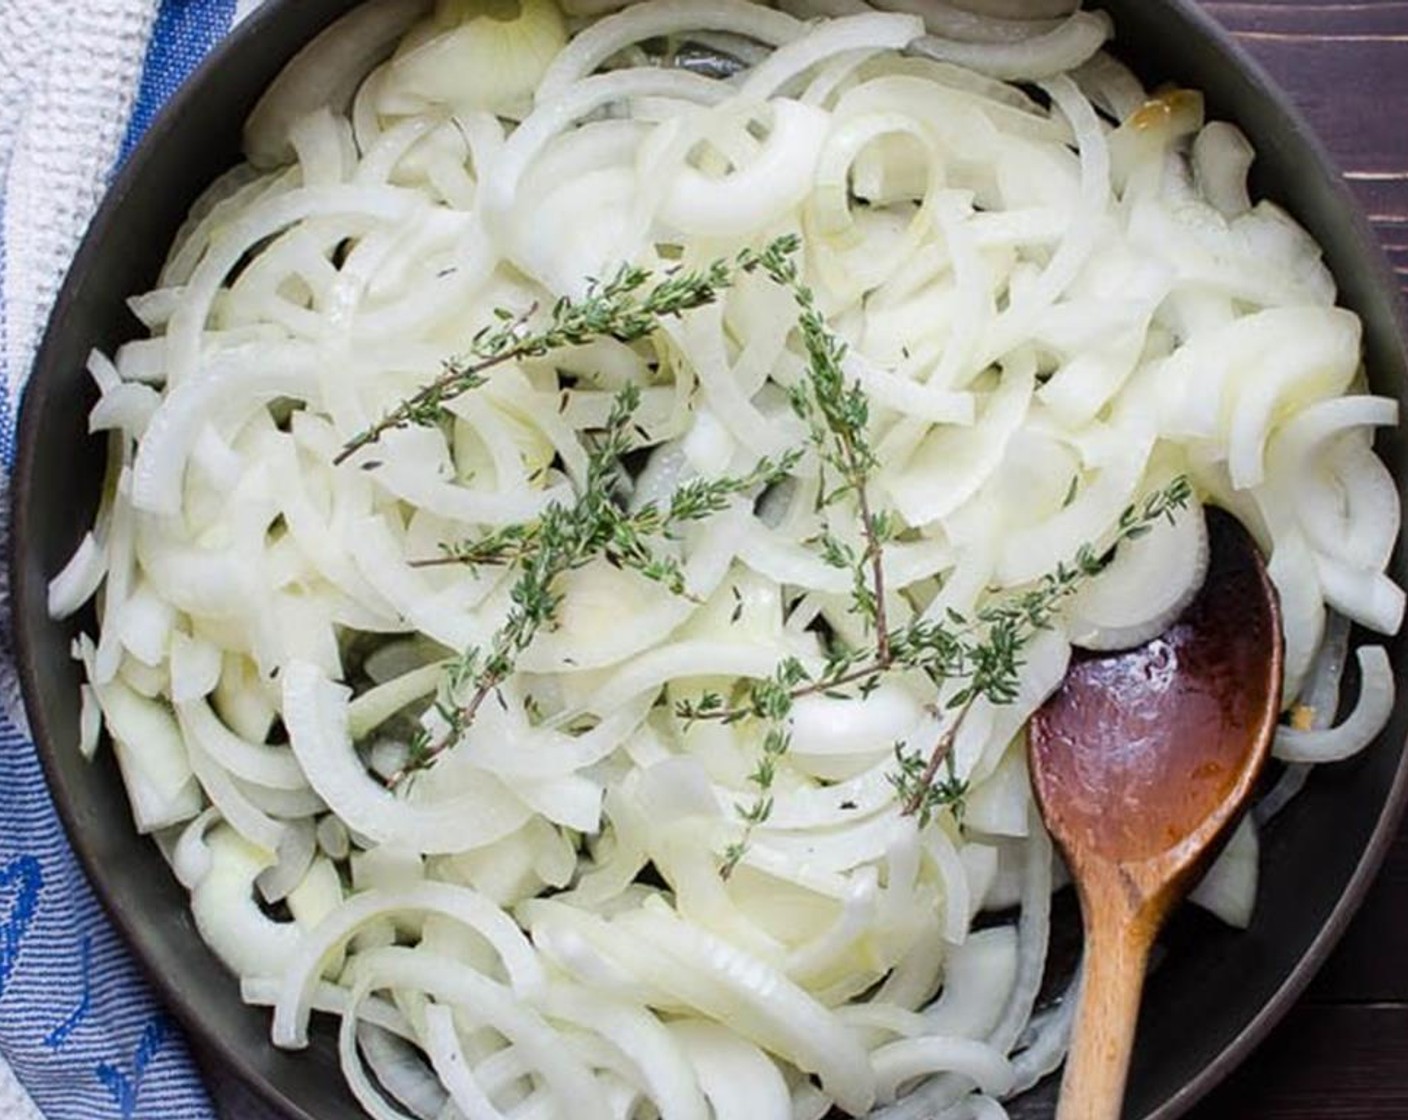 step 2 In a large skillet, heat the Olive Oil (1/4 cup) over medium-low heat. Add the onions and Fresh Thyme (4 sprigs) stir to coat with the olive oil and place a tight fitting lid on the pan. Cook for 3-5 minute. Do not brown the onions. Remove the thyme sprigs and discard.